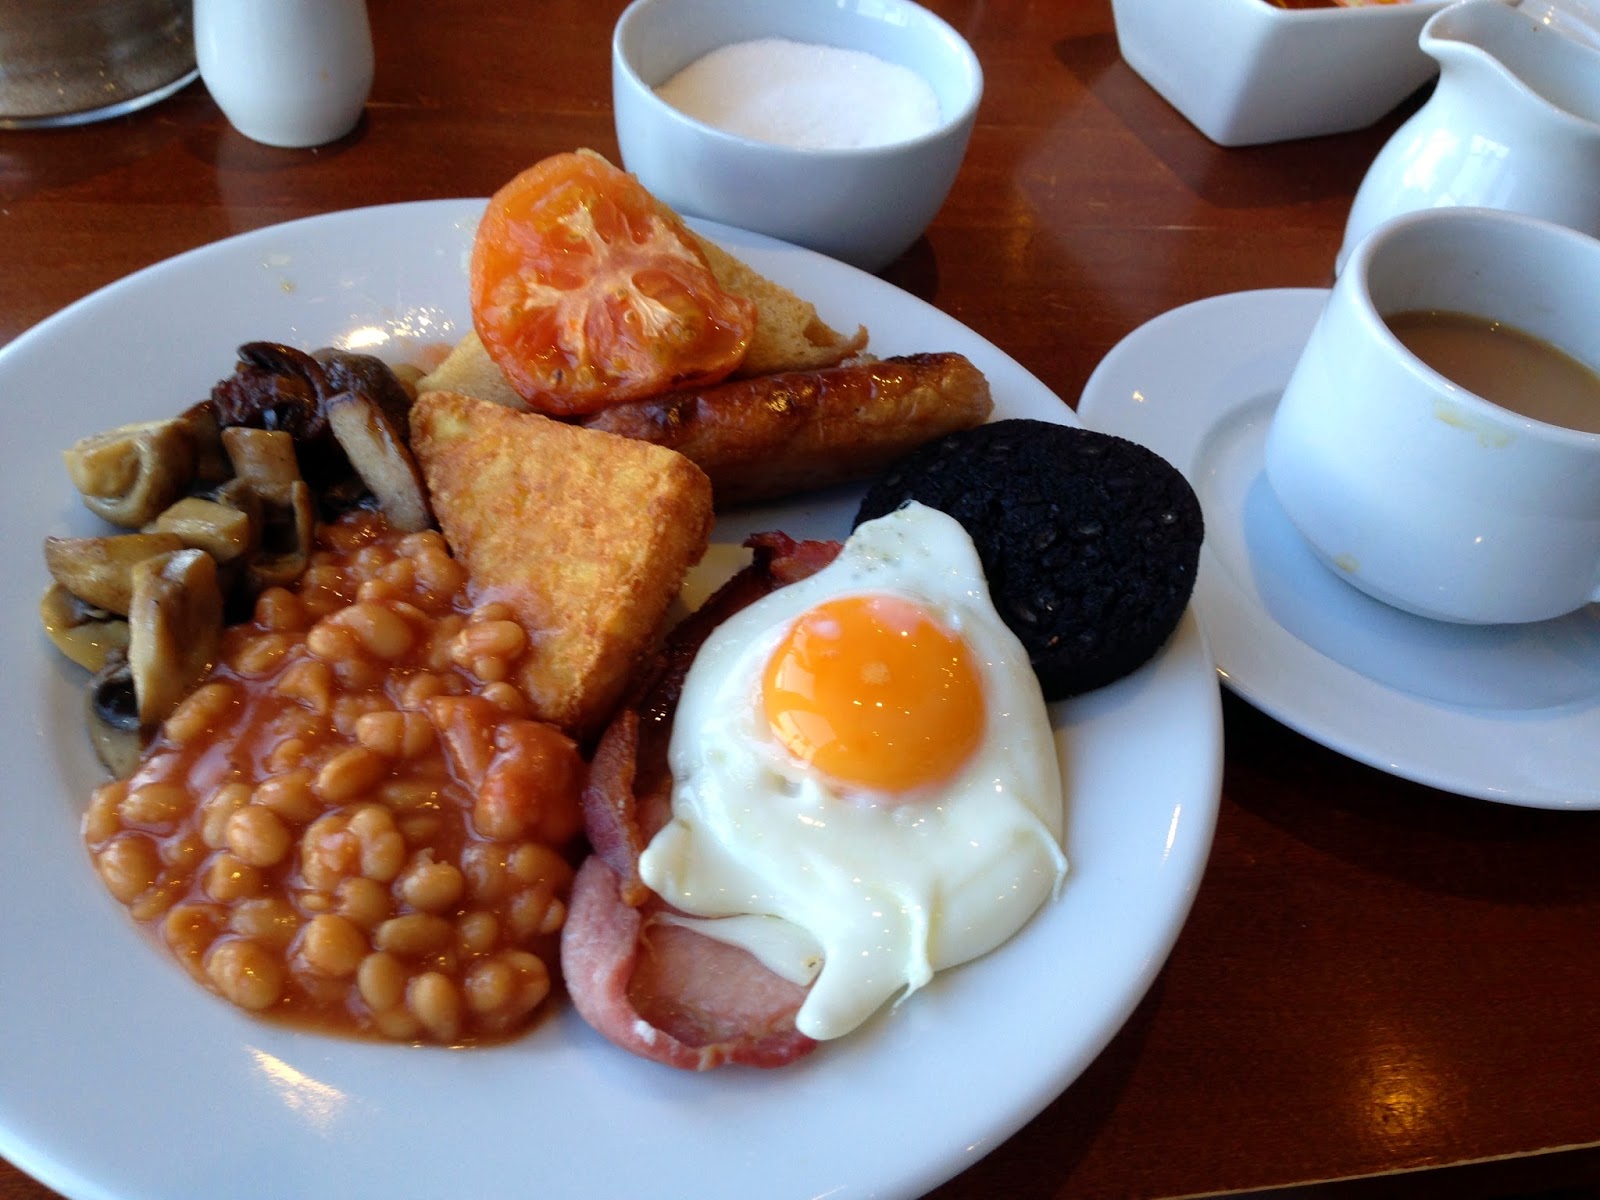 Fried Breakfast, English Breakfast, Full Monty, eggs, bacon, sausage, black pudding, hash brown, mushrooms, tomato, beans, hot tea, toast and marmalade